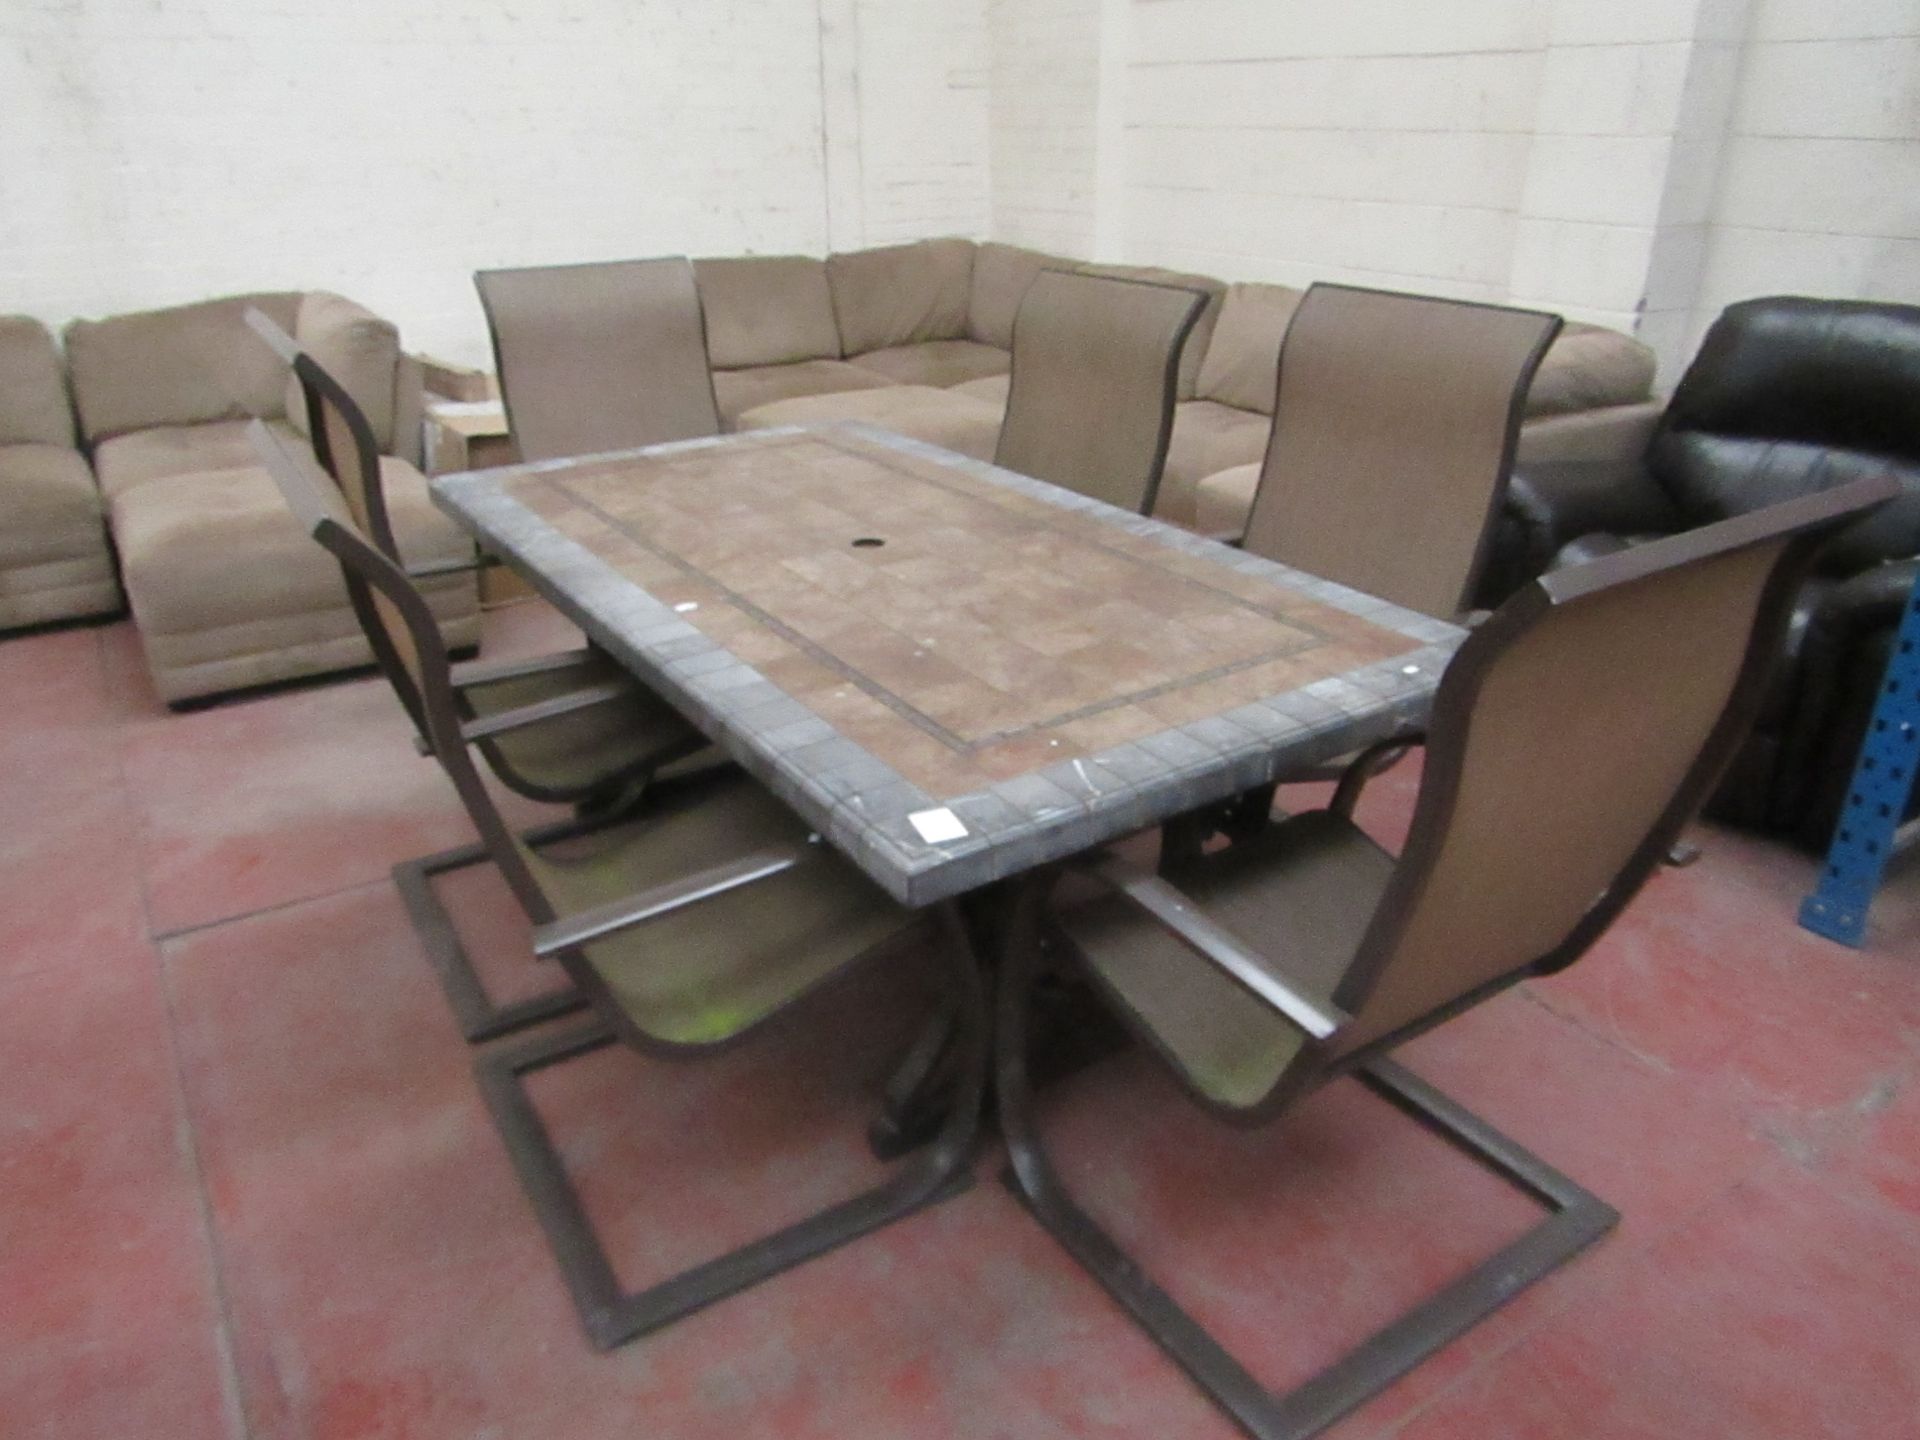 6 Seater Tile topped table and 6 Chairs, one of the chairs is damaged and one of the corners of